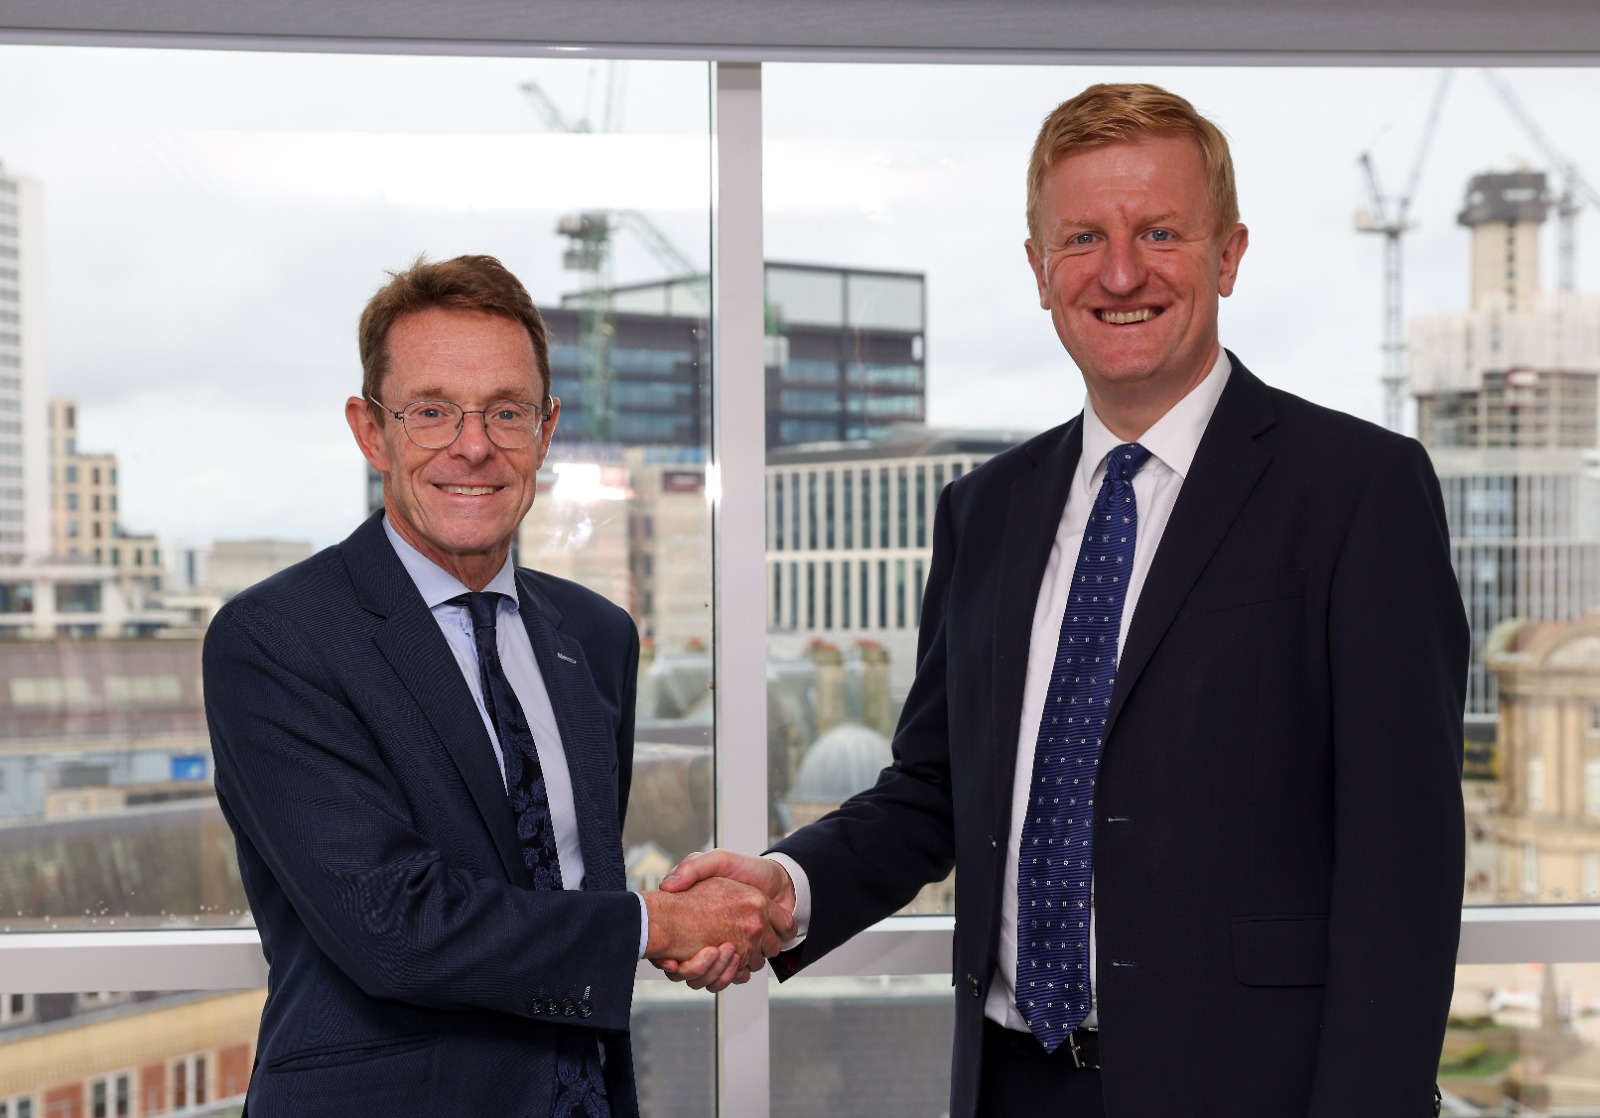 Andy Street, Mayor of the West Midlands (left) and Deputy Prime Minister Oliver Dowden discussed the relocation of civil service jobs to the region during their meeting